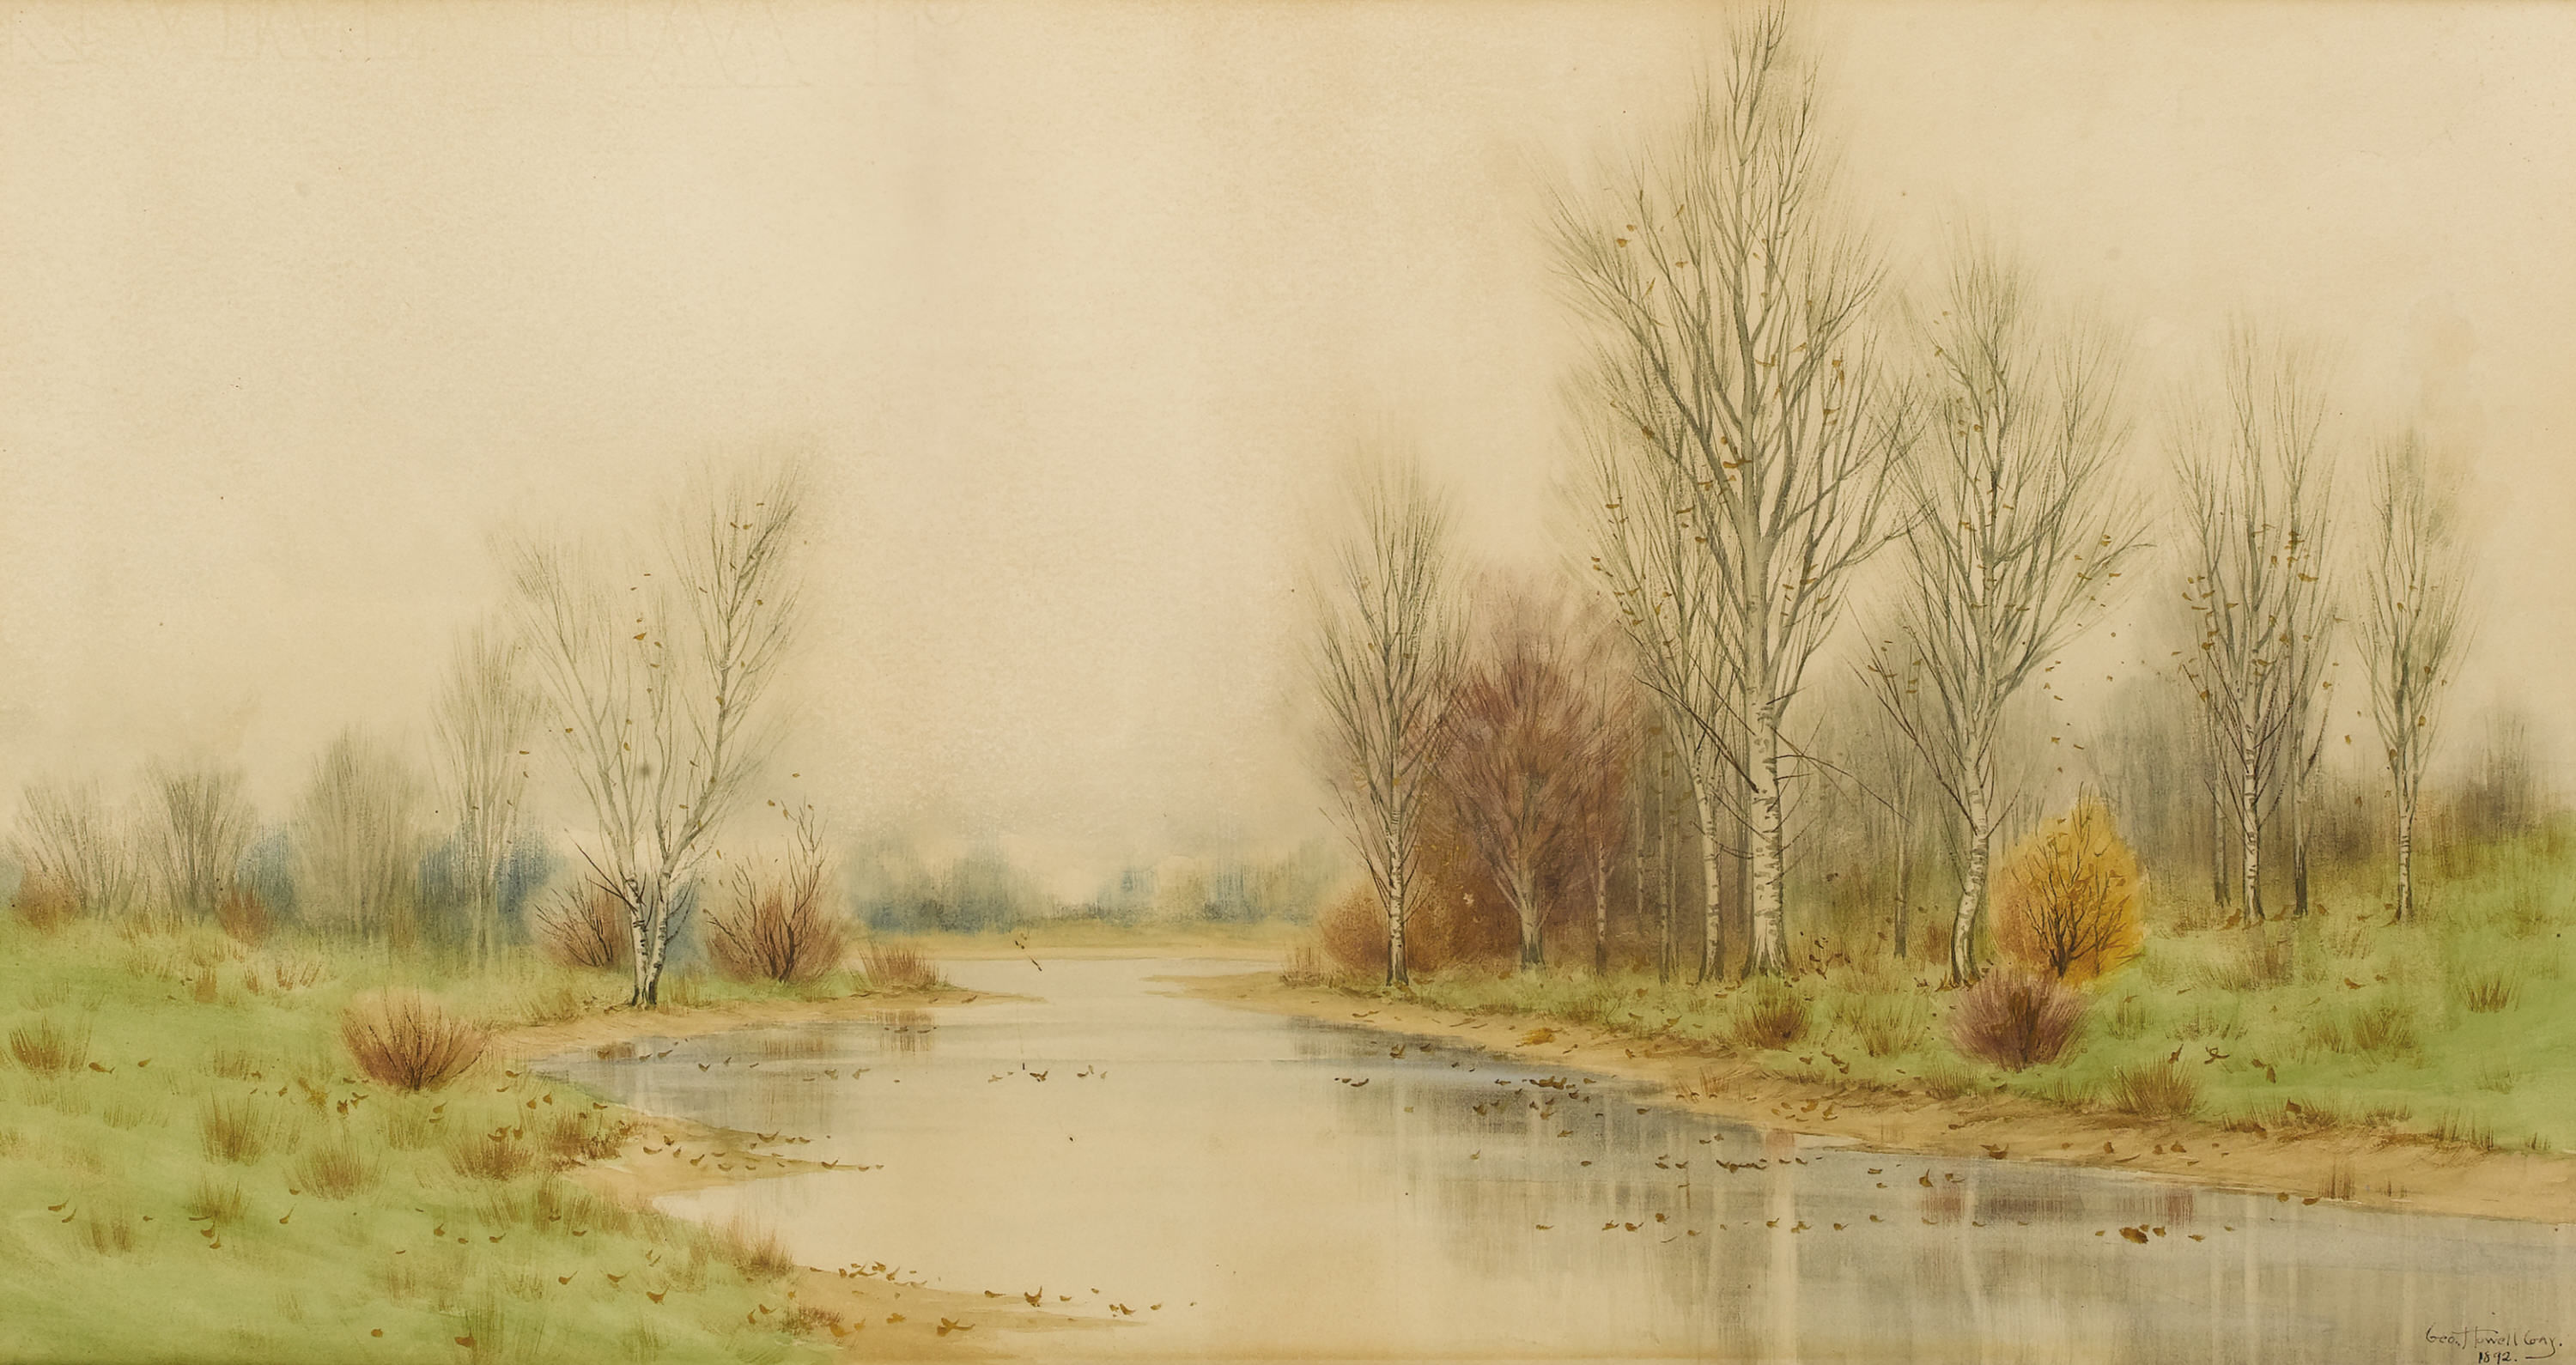 Autumn River Landscape-George Howell Gay-1892